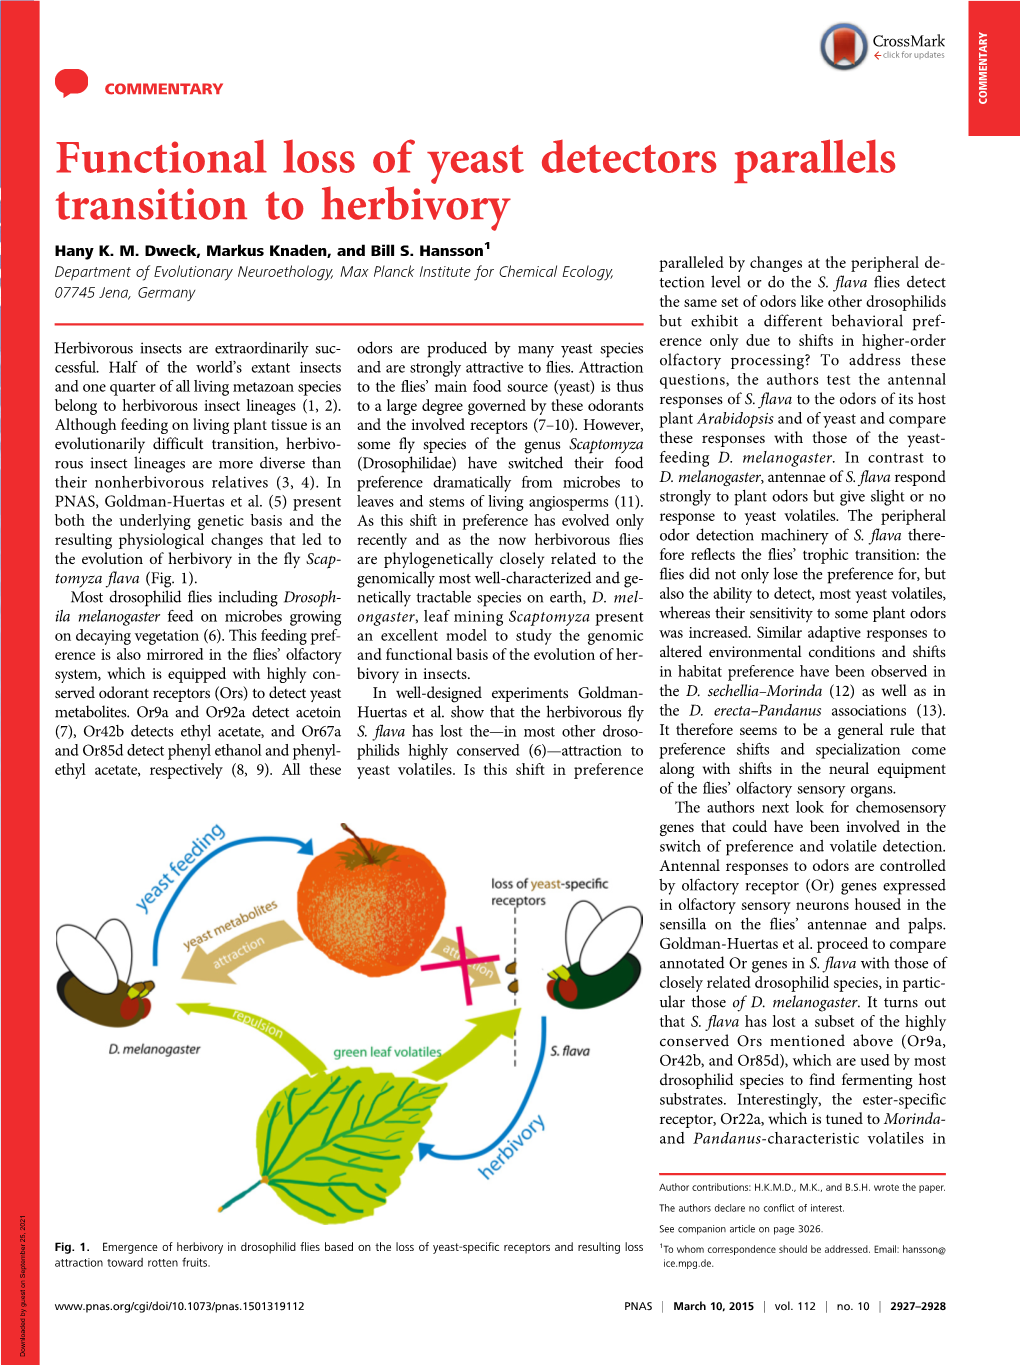 Functional Loss of Yeast Detectors Parallels Transition to Herbivory